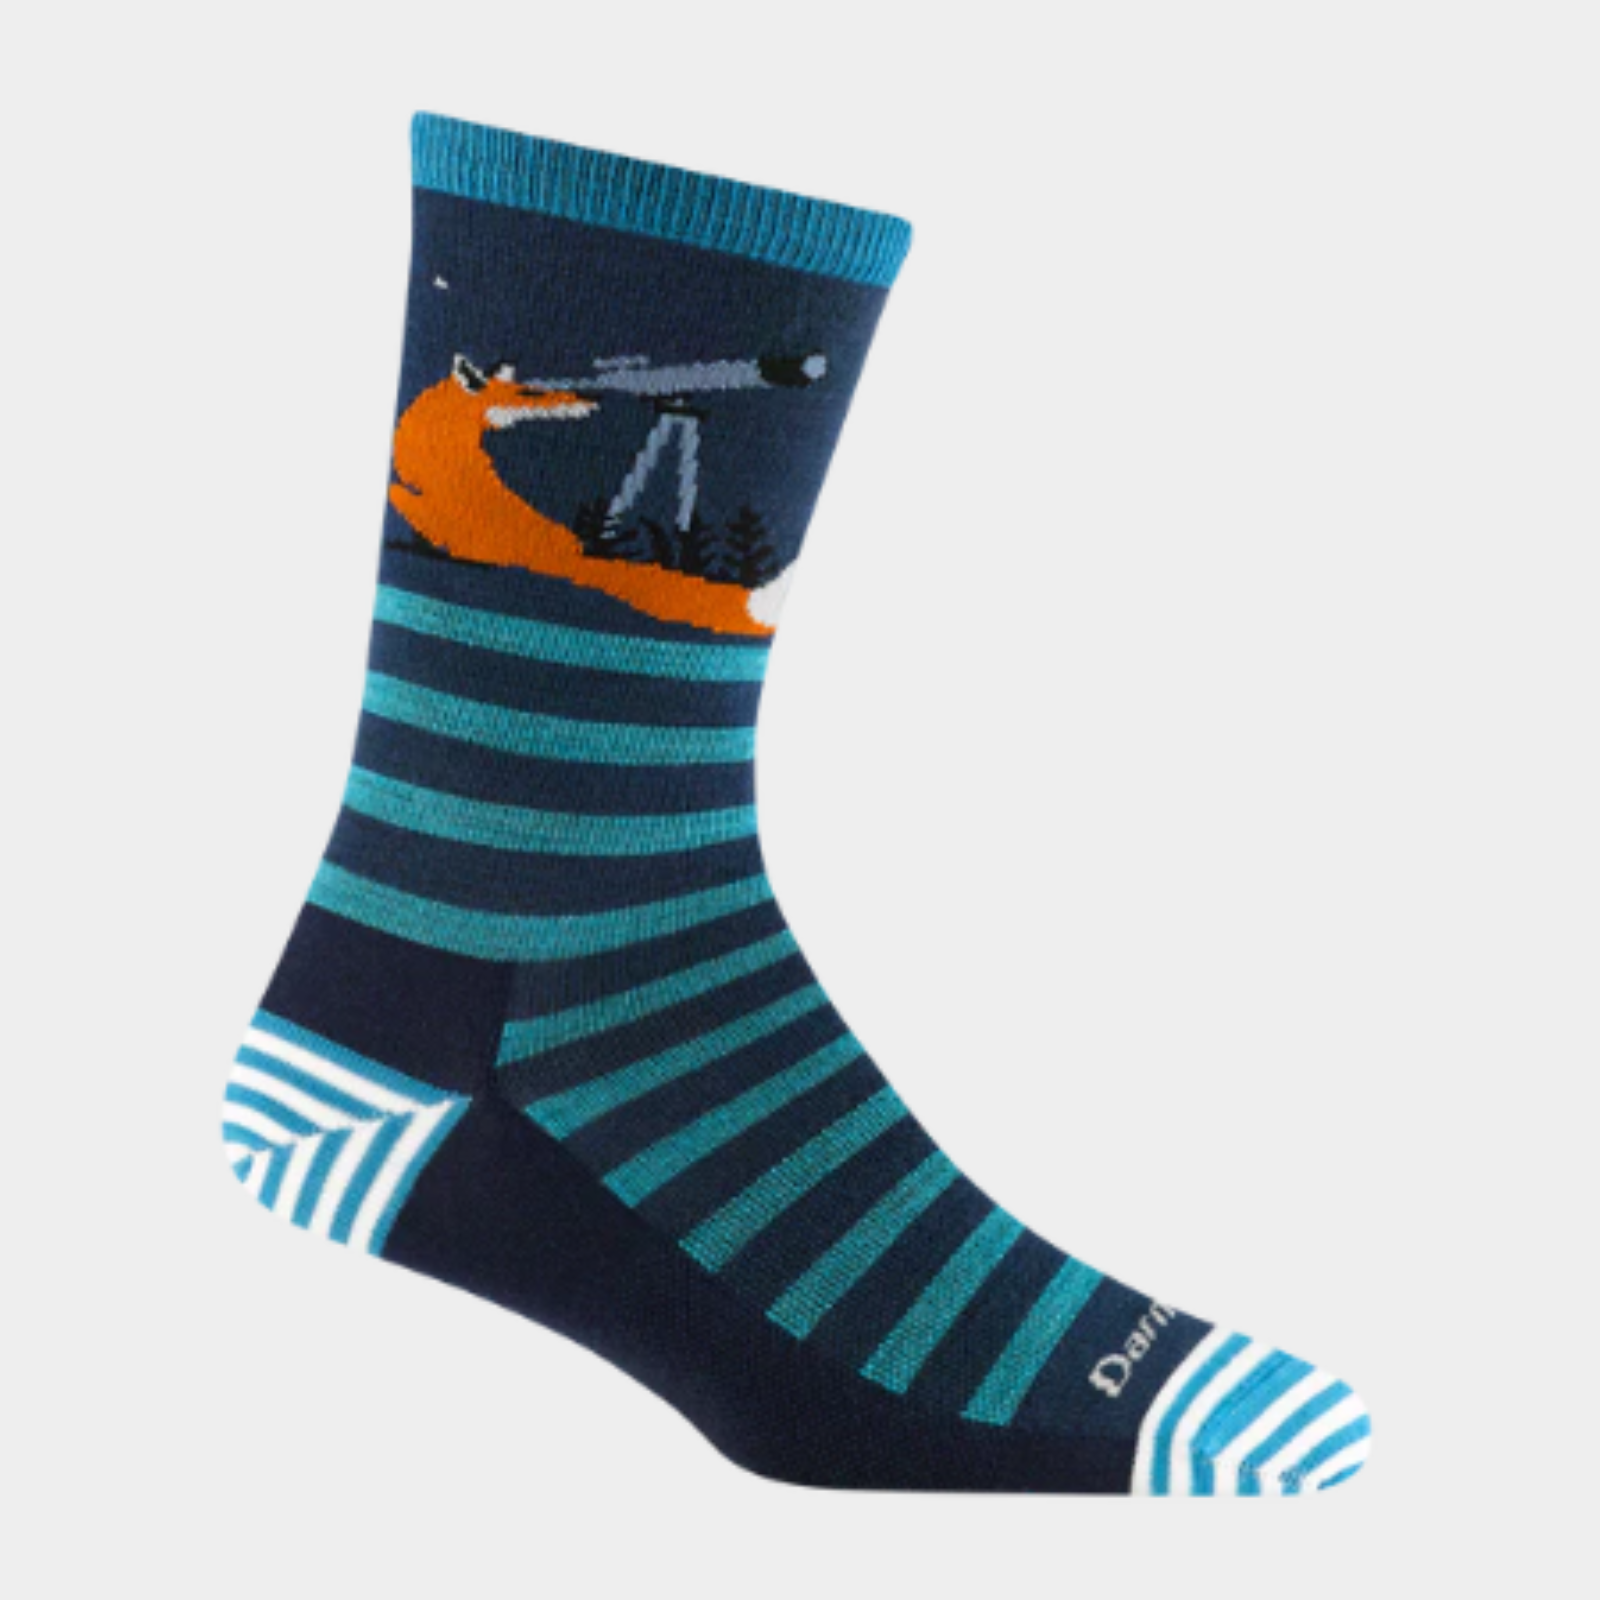 Darn Tough 6037 Animal Haus Lightweight Cushion Crew women's sock featuring navy blue sock with teal stripes and fox looking through telescope at top. Sock shown on display foot. 